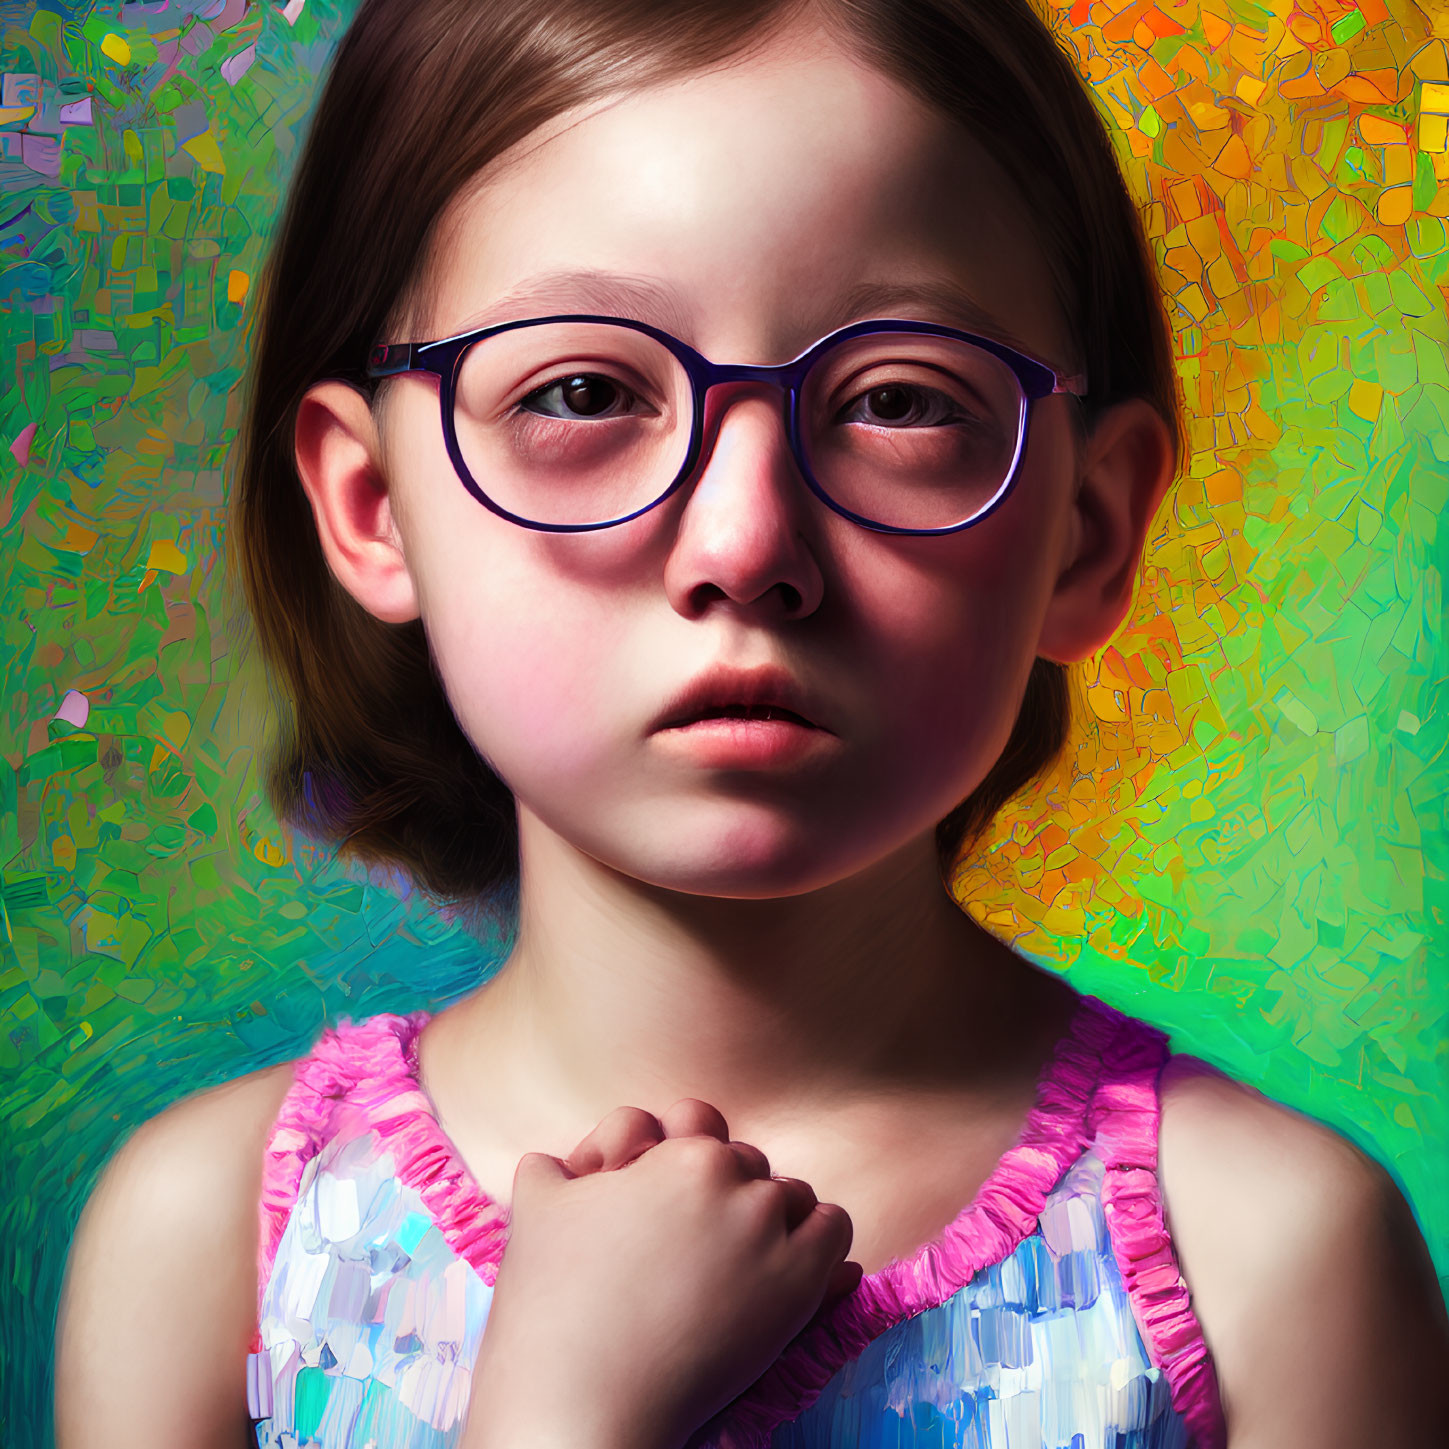 Young girl in colorful dress with glasses against vibrant mosaic background